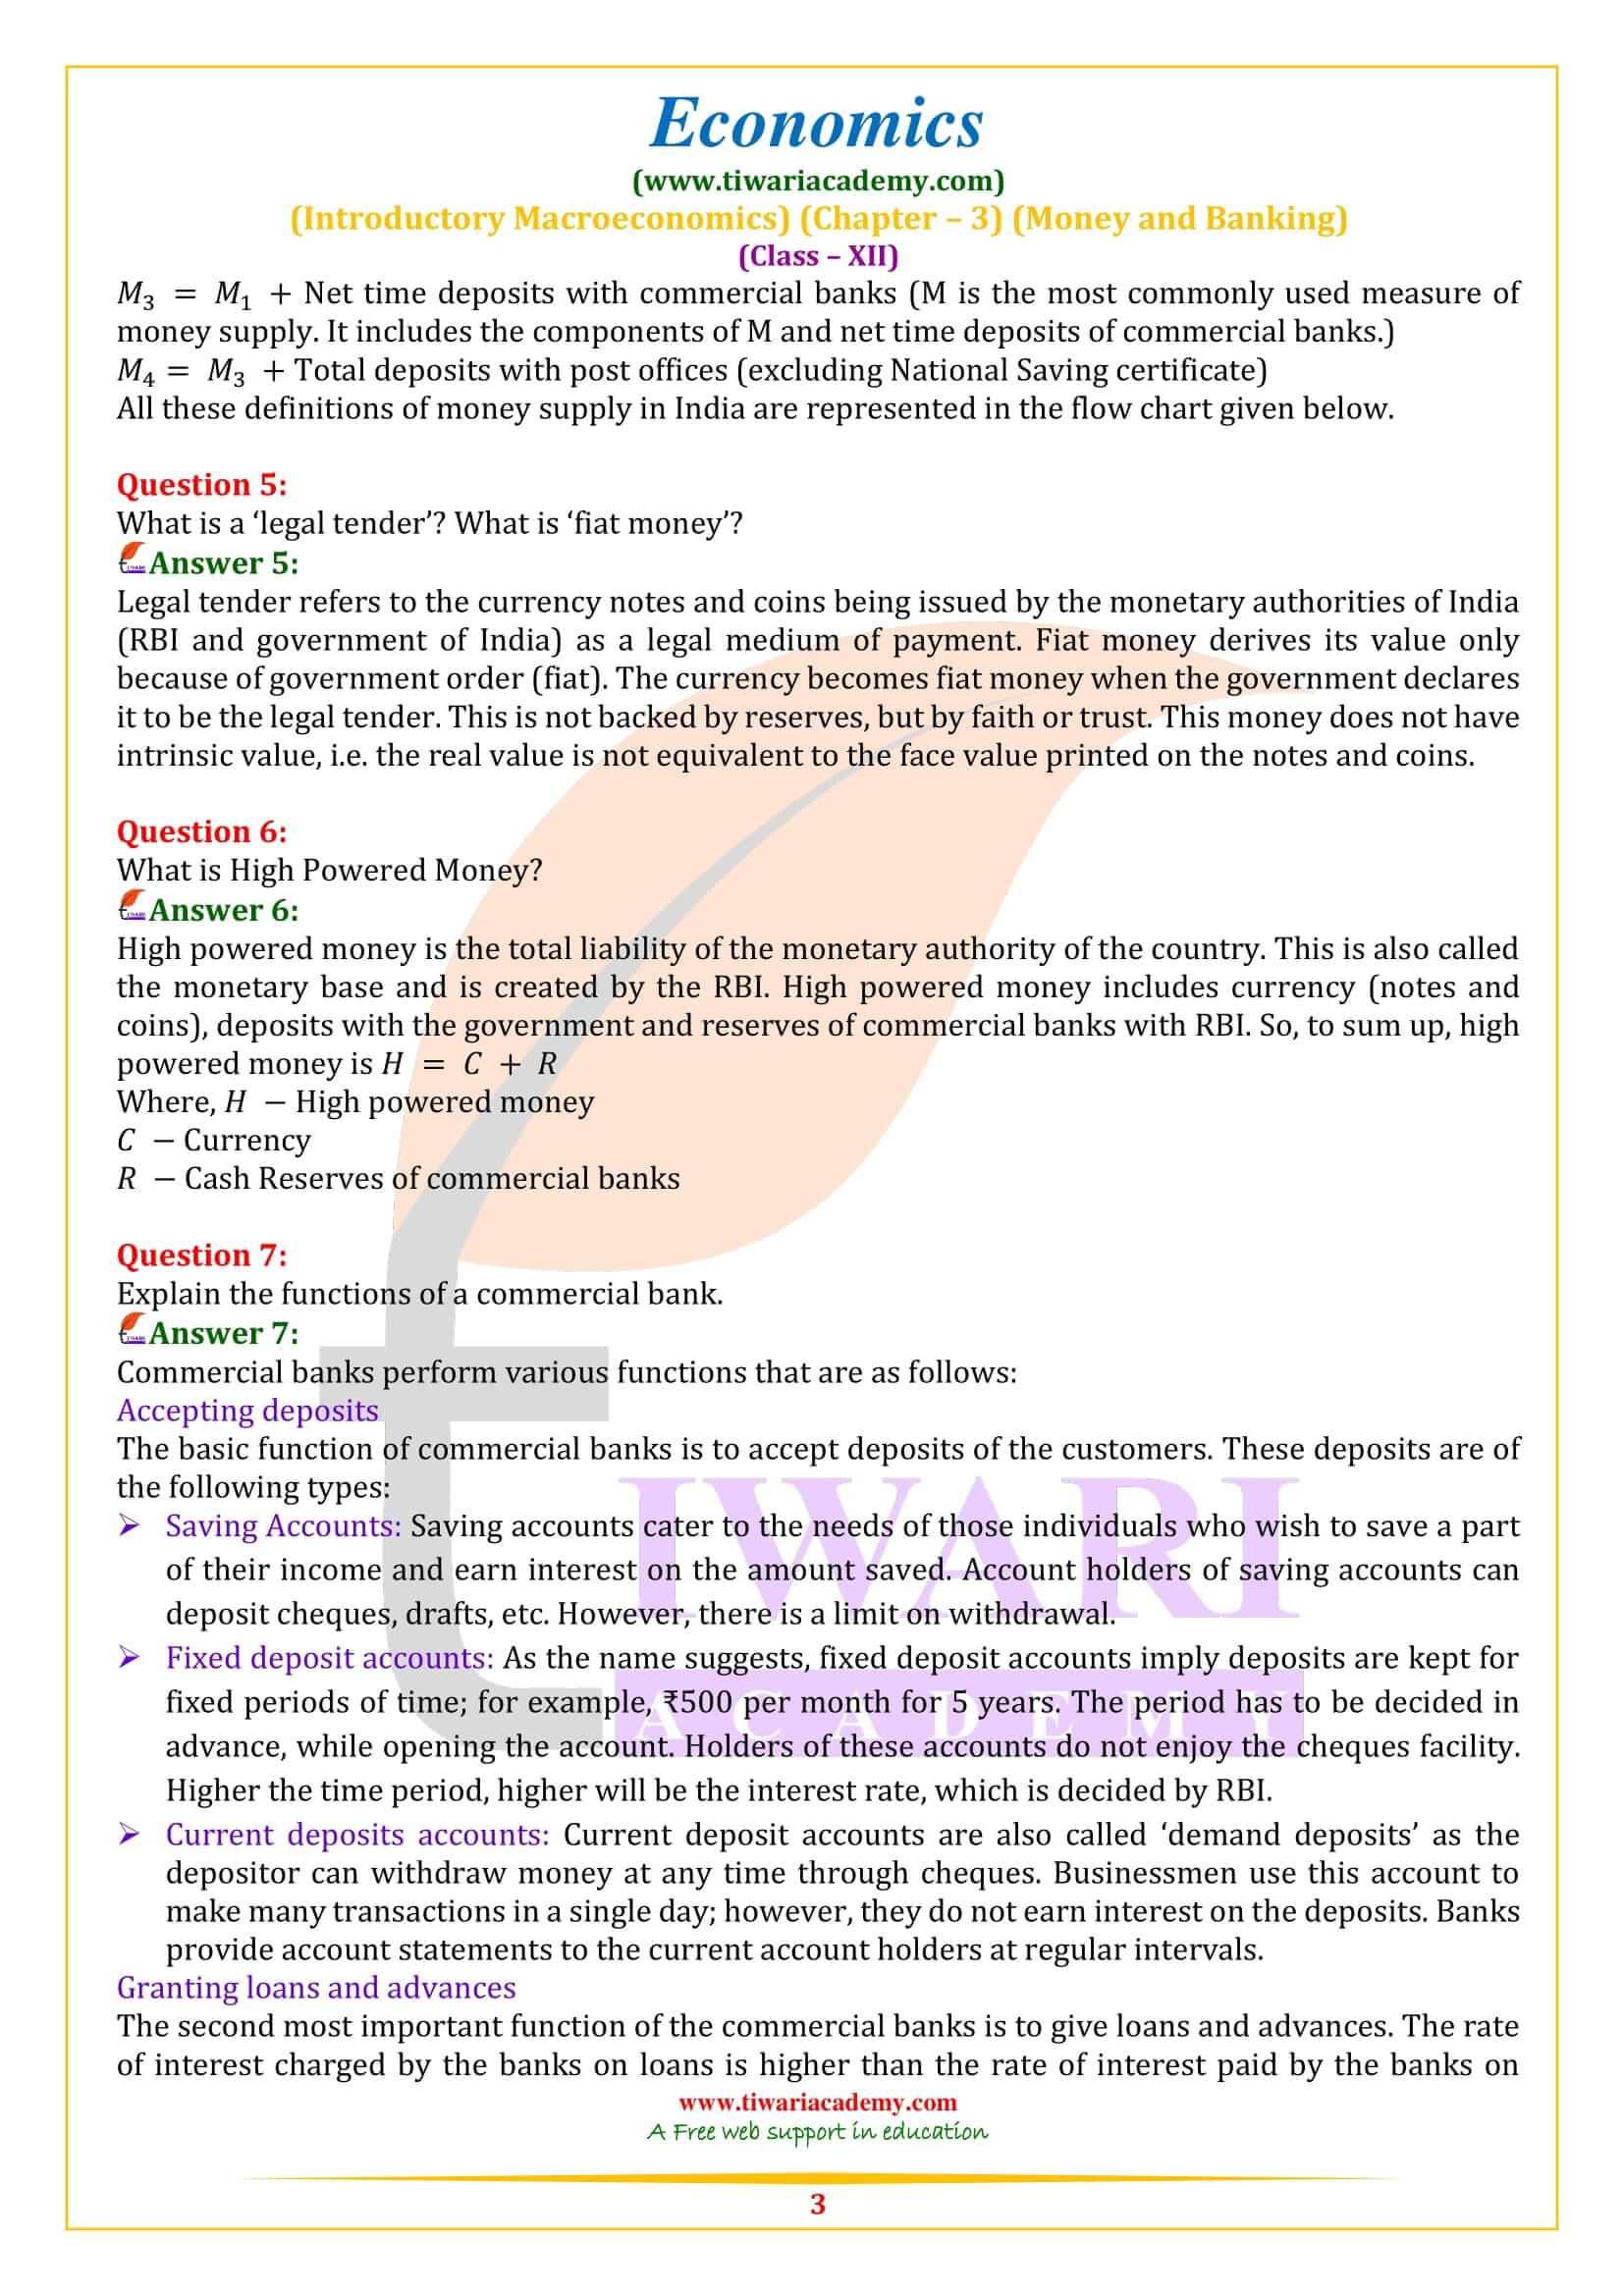 NCERT Solutions for Class 12 Economics Chapter 3